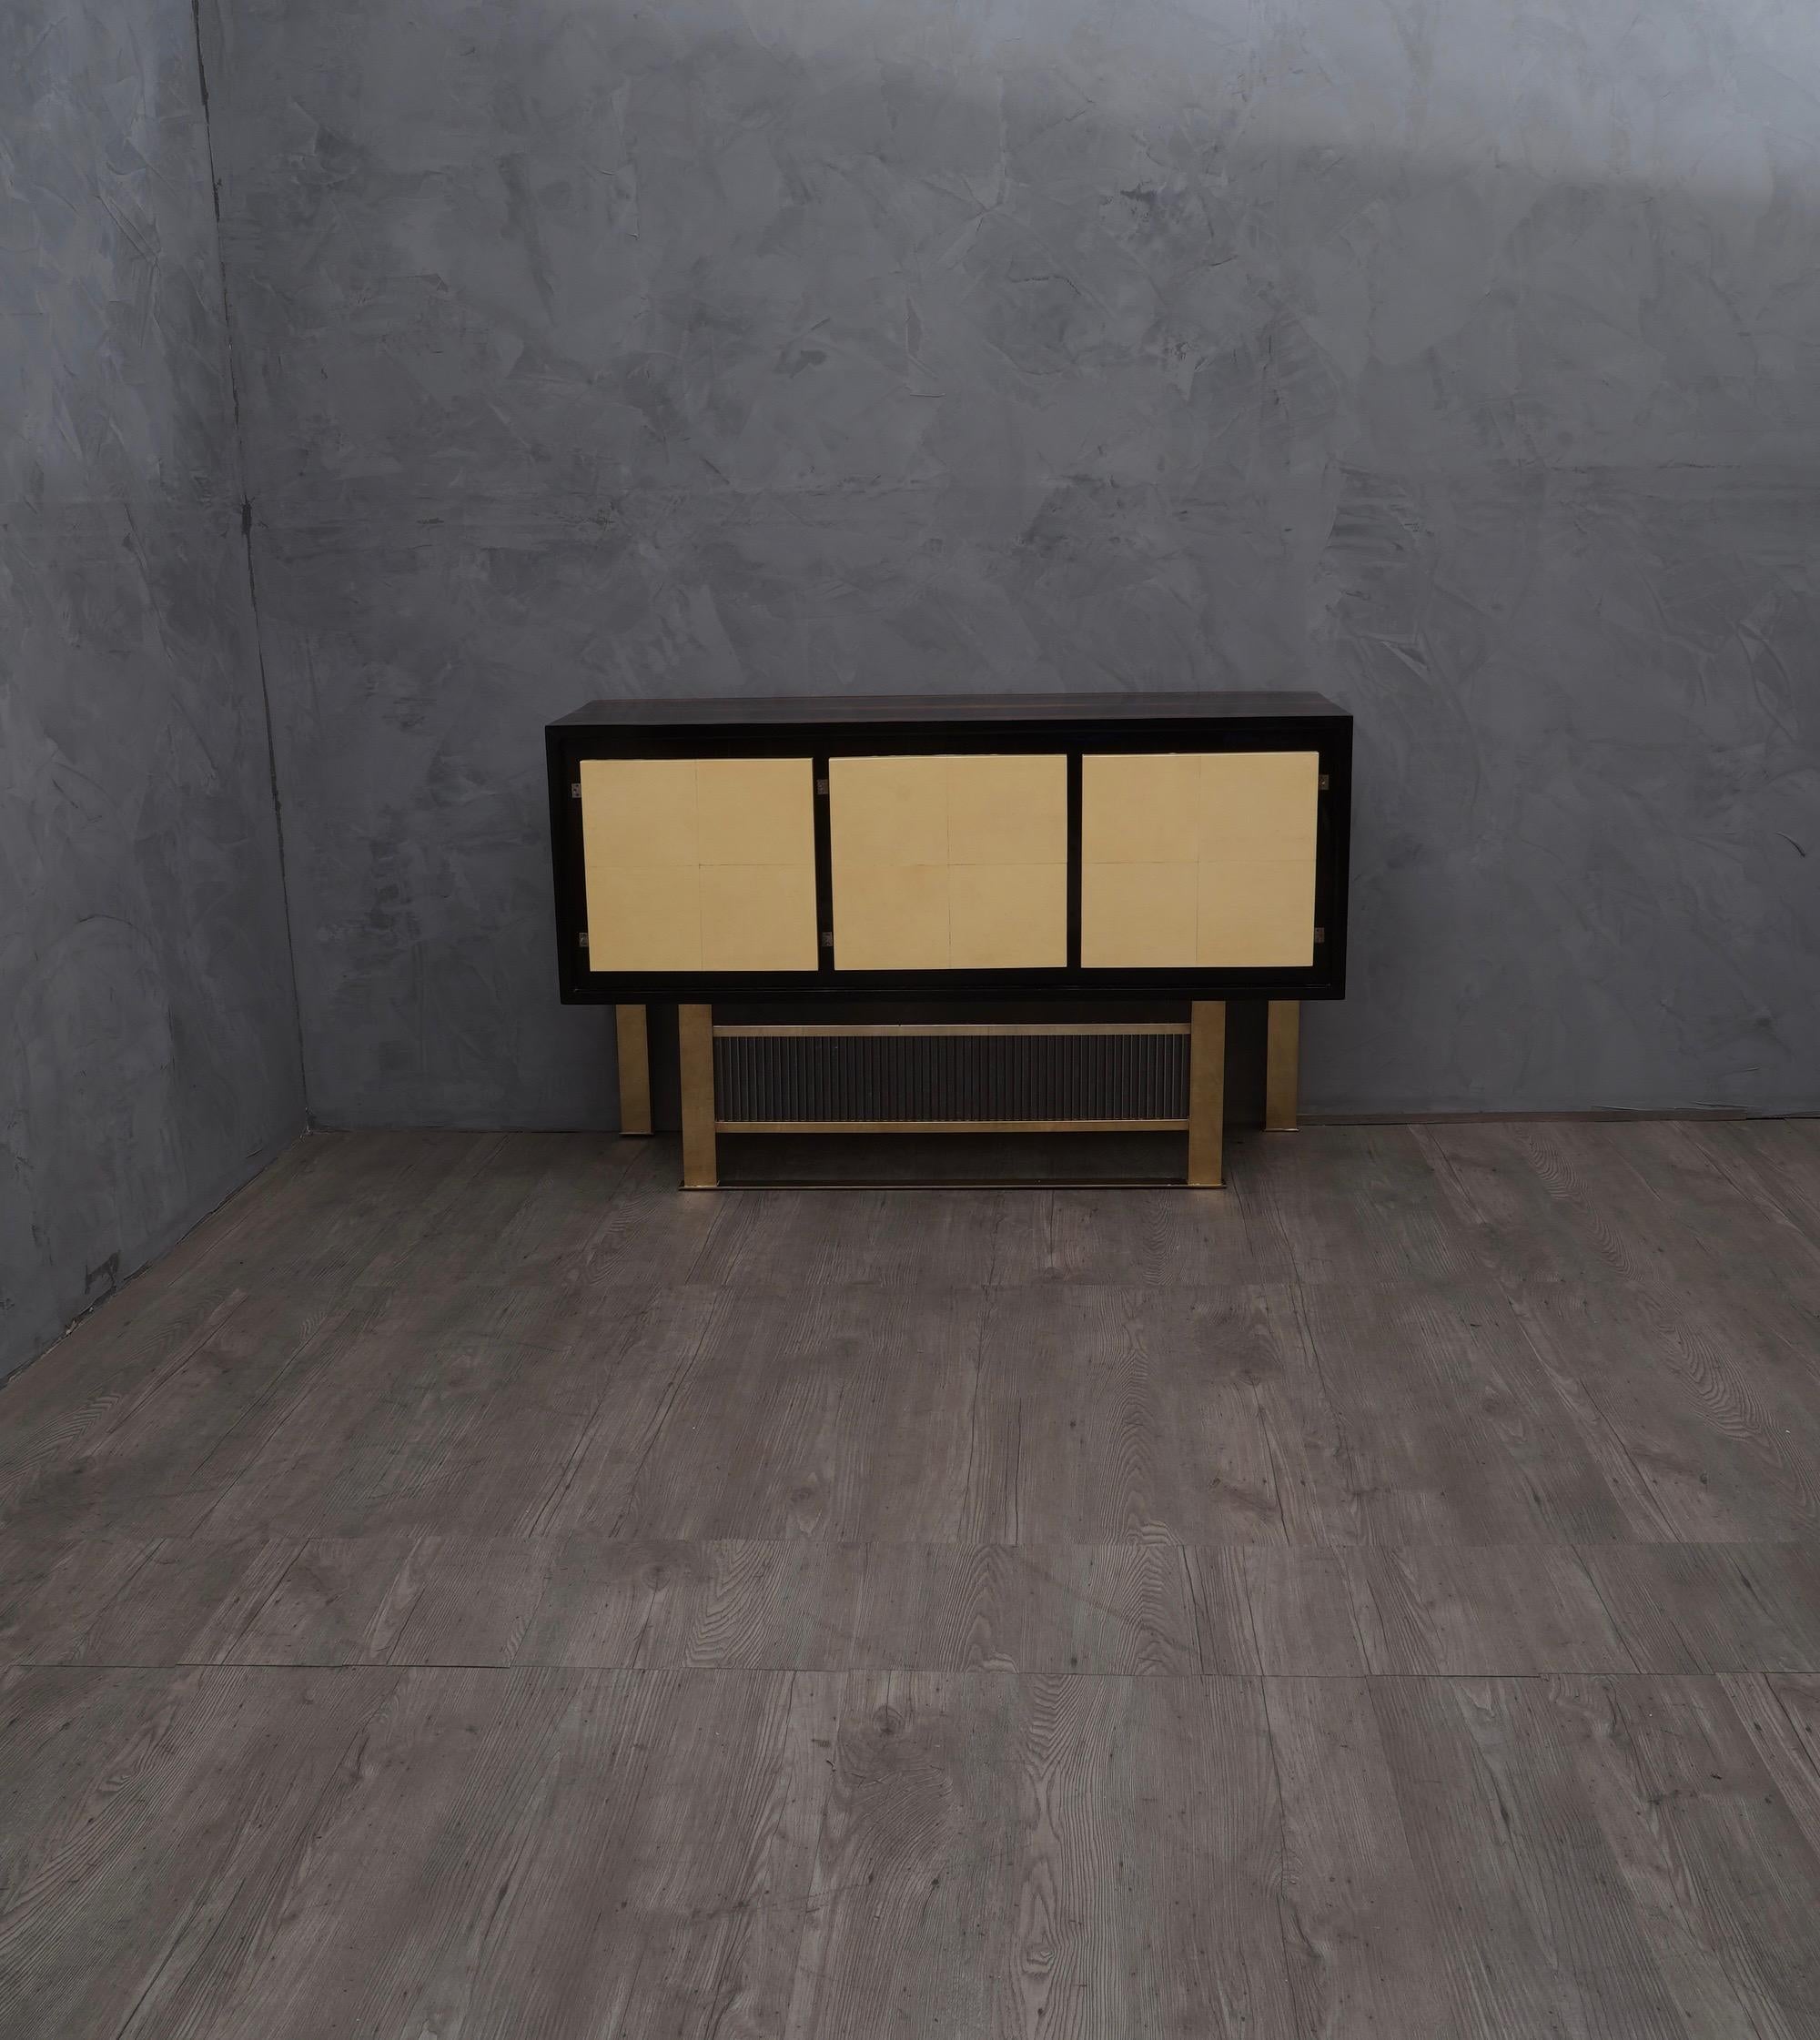 Precious materials stage an elegant sideboards of the middle of the century, in true Italian style of Paolo Buffa, Vittorio Dassi and Osvaldo Borsani.

All veneered in Walnut wood, with the door covered in goatskin. There are the three doors covered